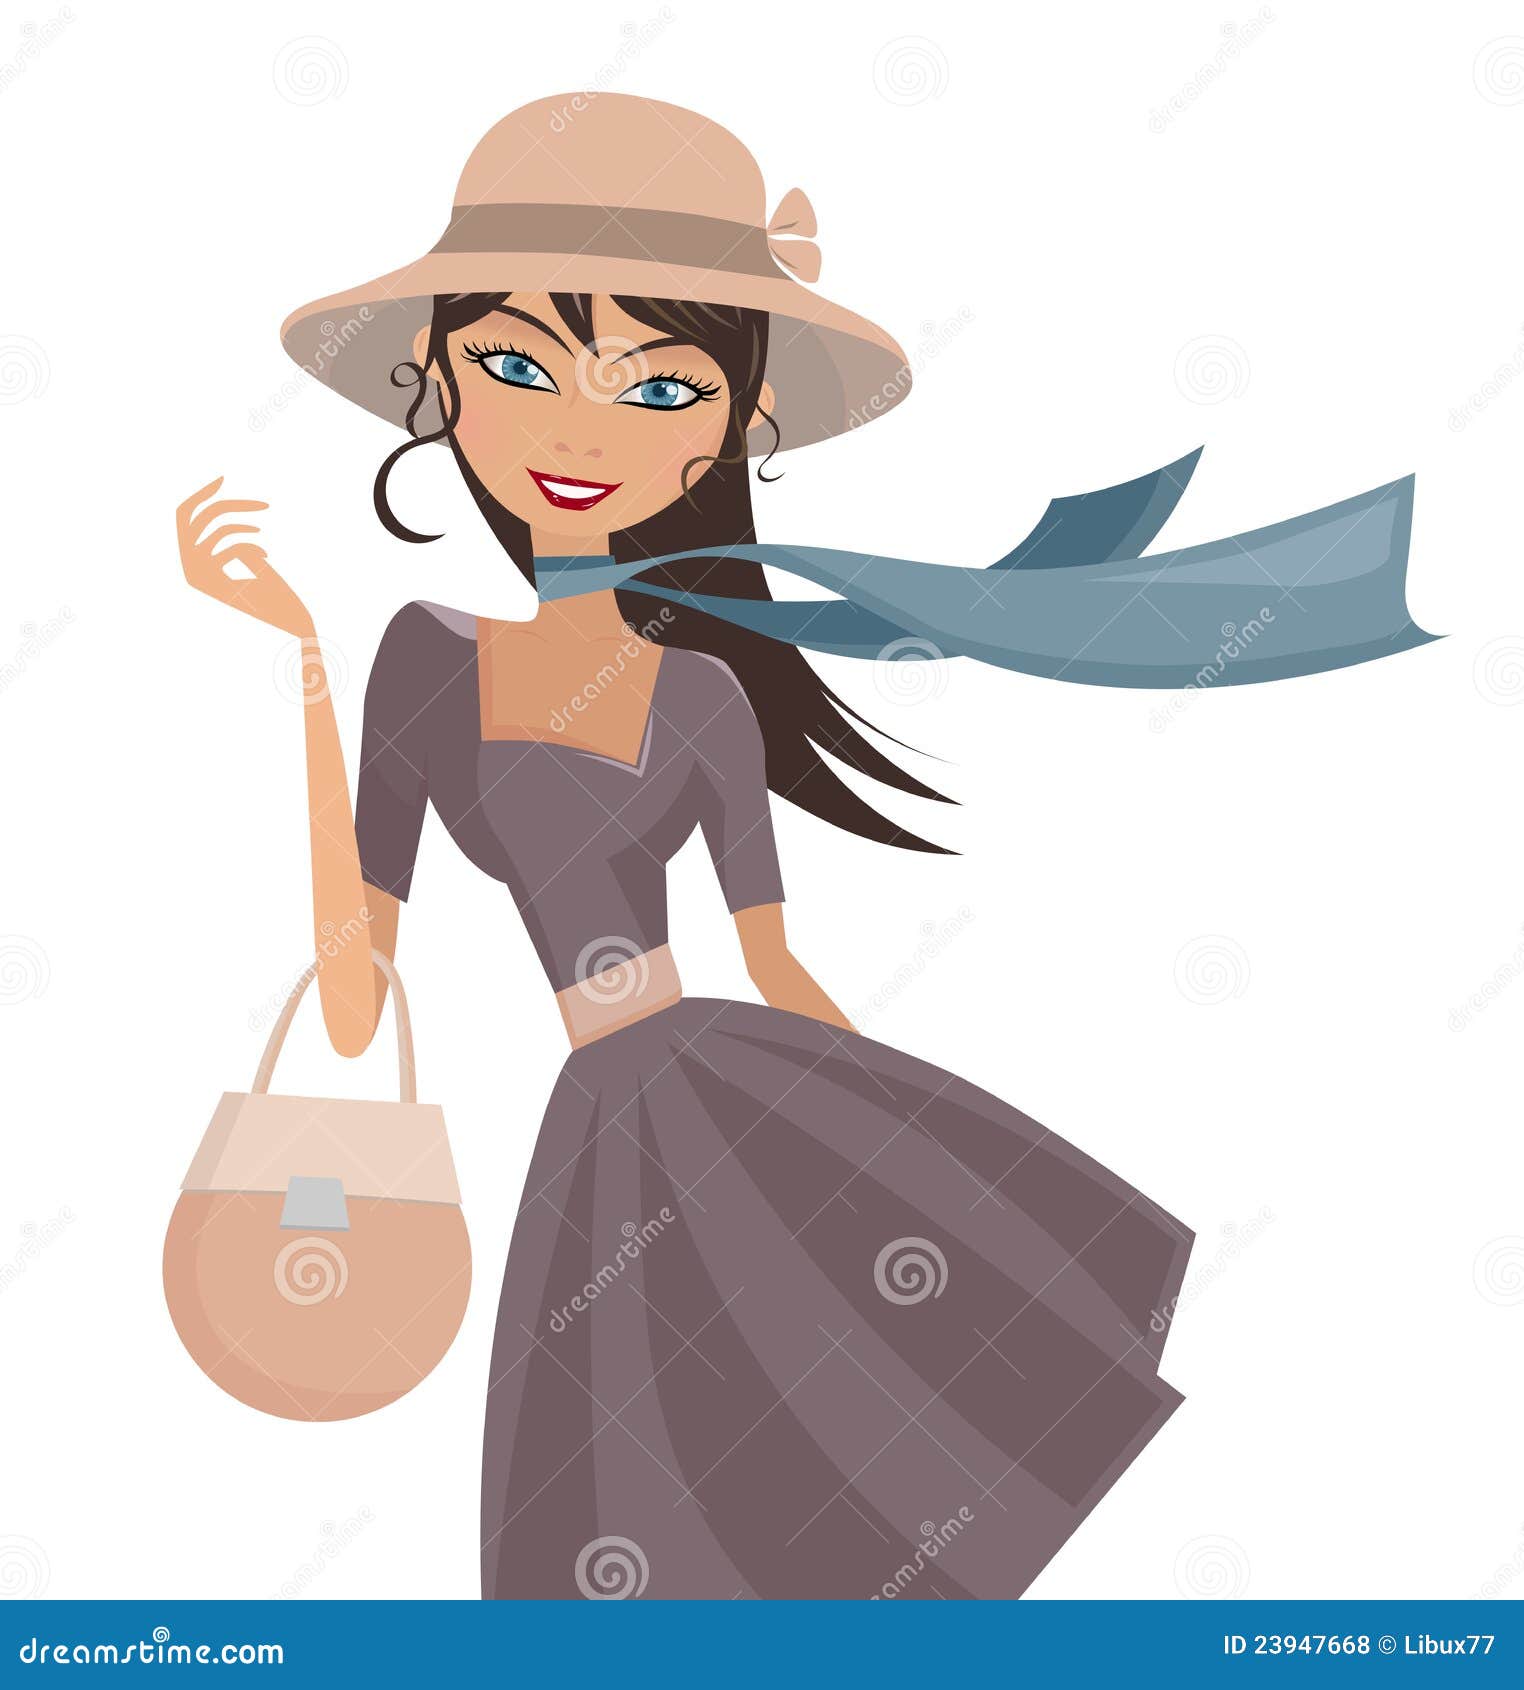 woman in hat clipart - photo #41